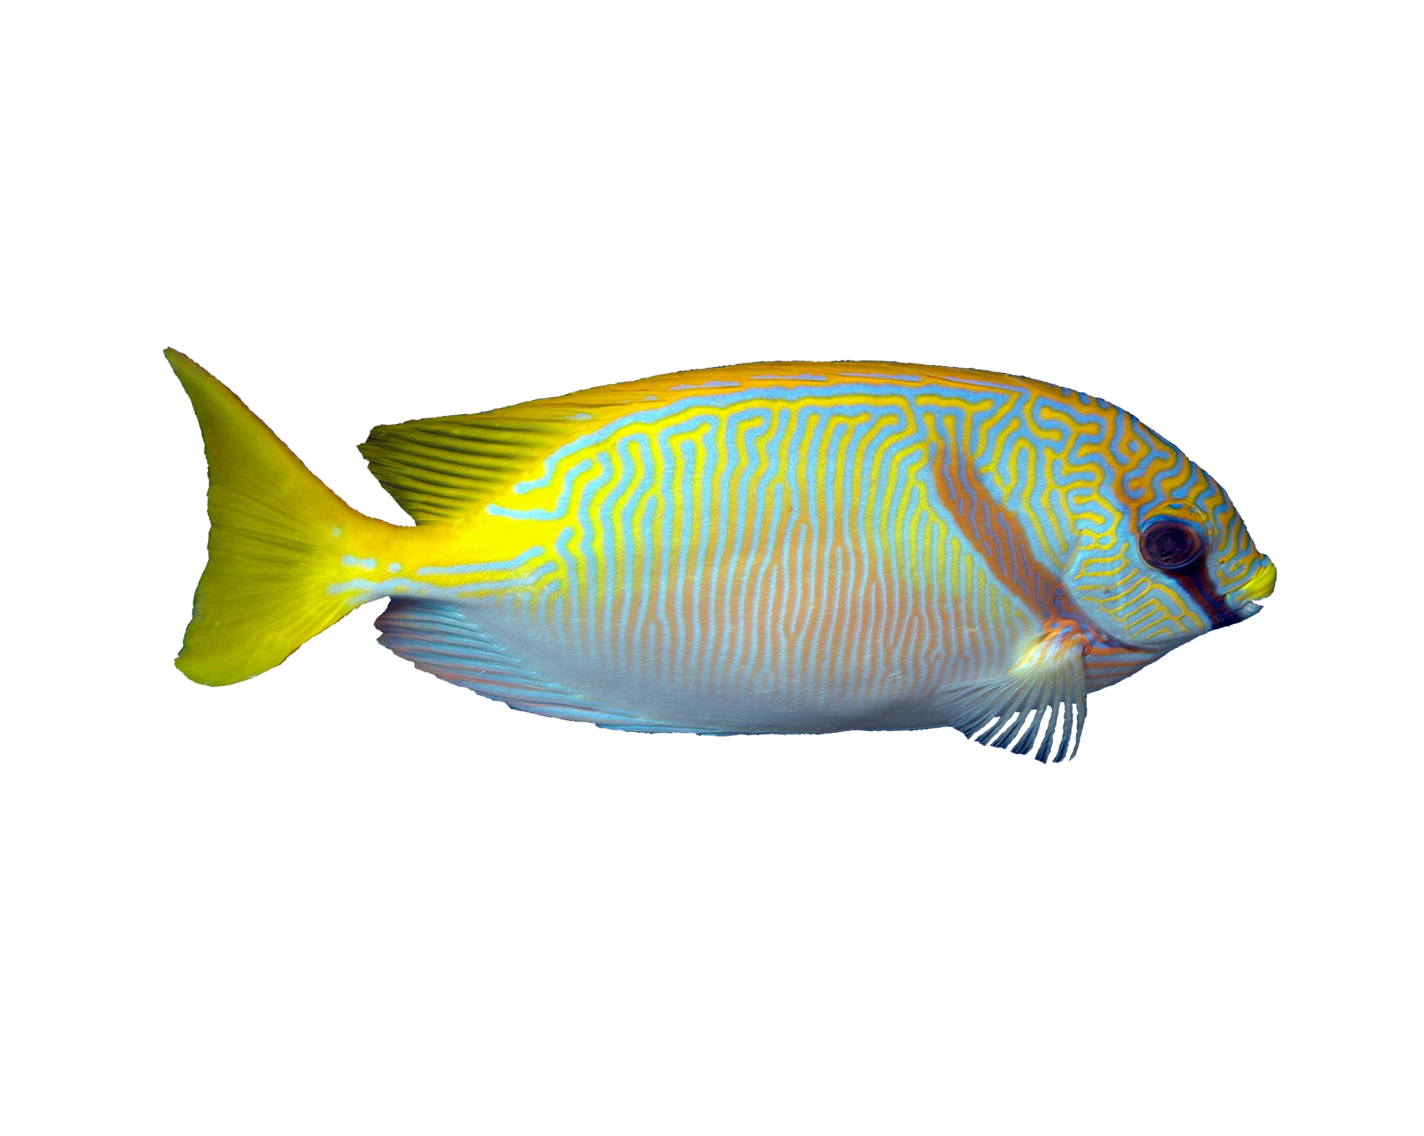 clipart flames angelfish